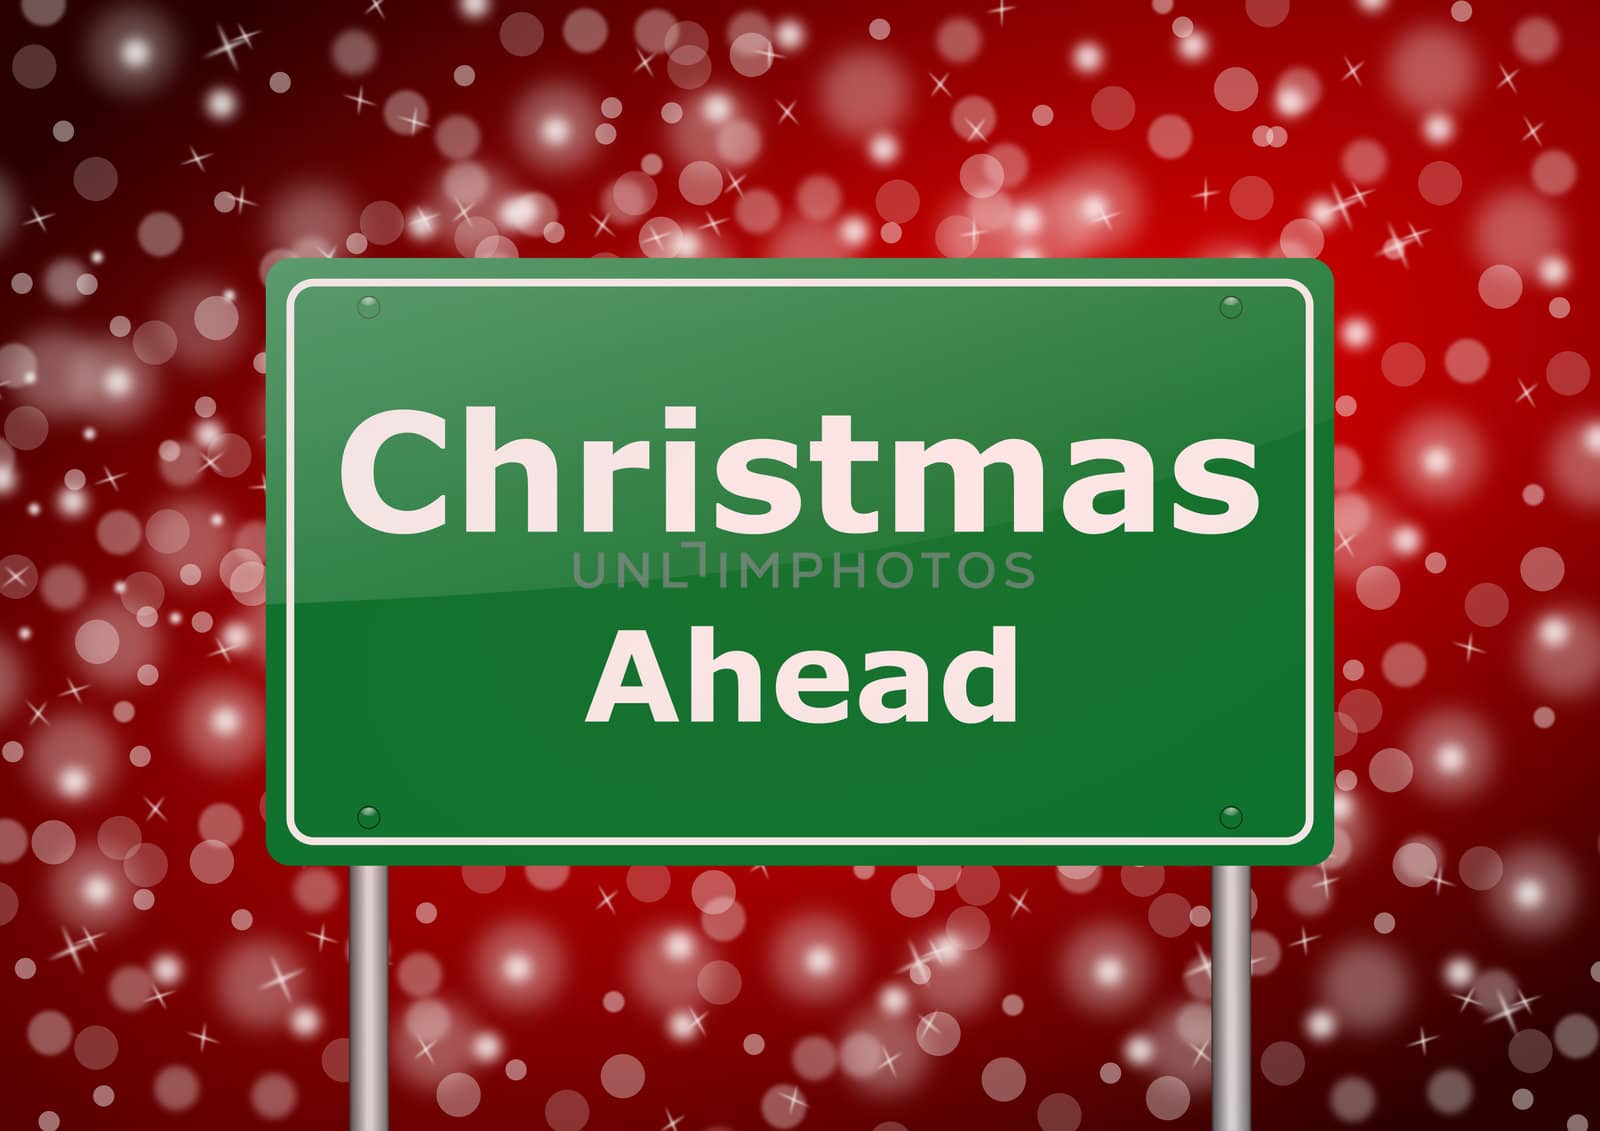 christmas ahead traffic sign on snowing background by alexwhite